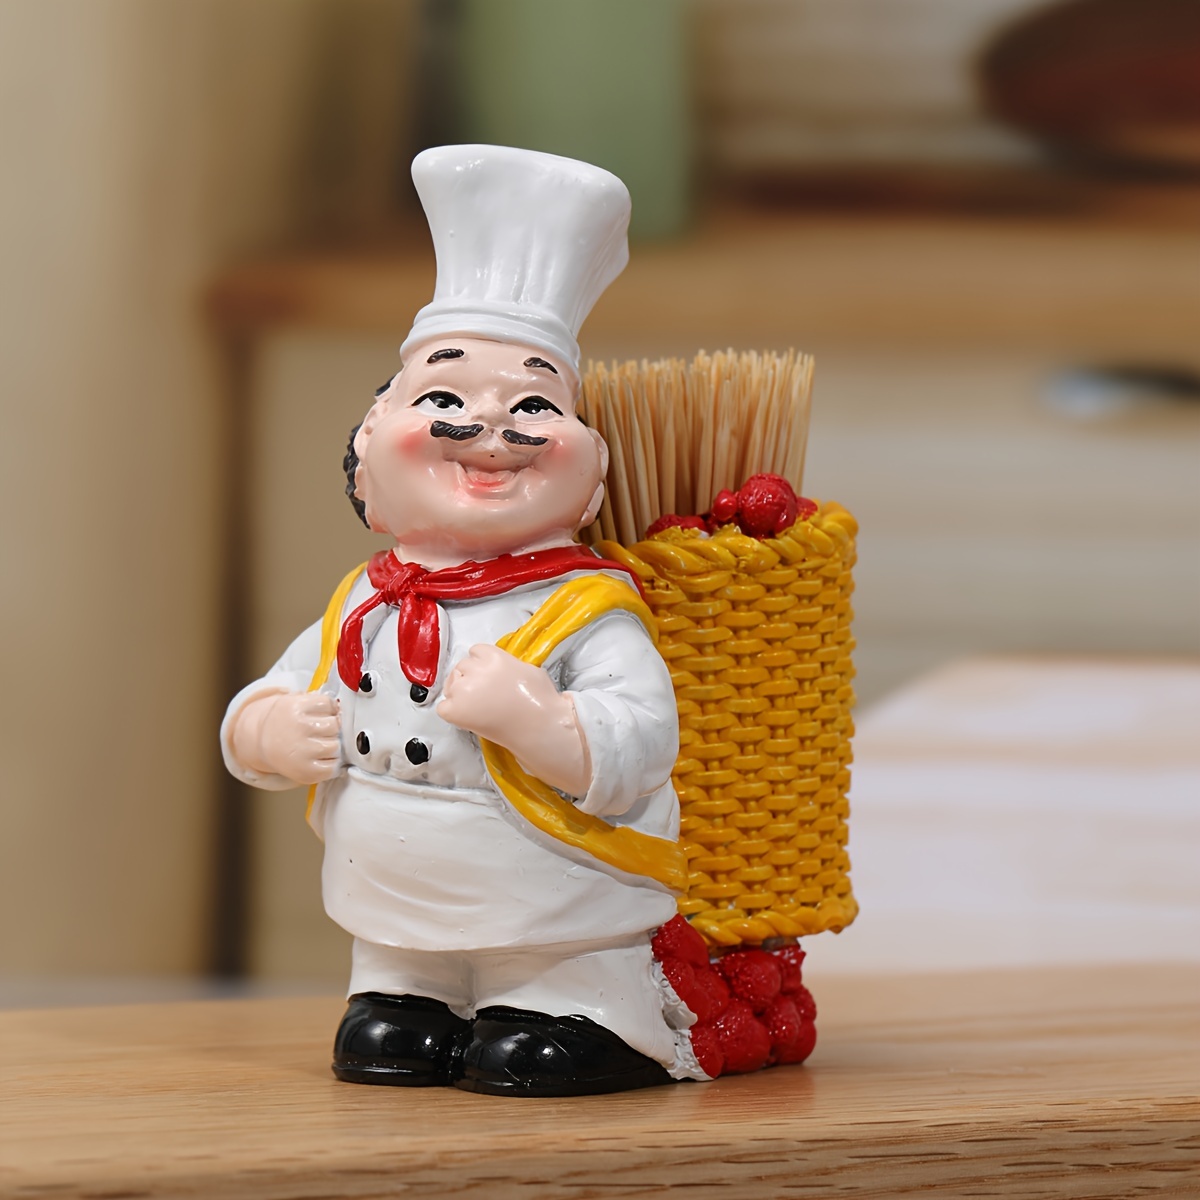 

1pc, Chef Toothpick Holder With Wicker Basket, Resin Kitchen Decor, Table Accessory, Home Decor, Restaurant Decor